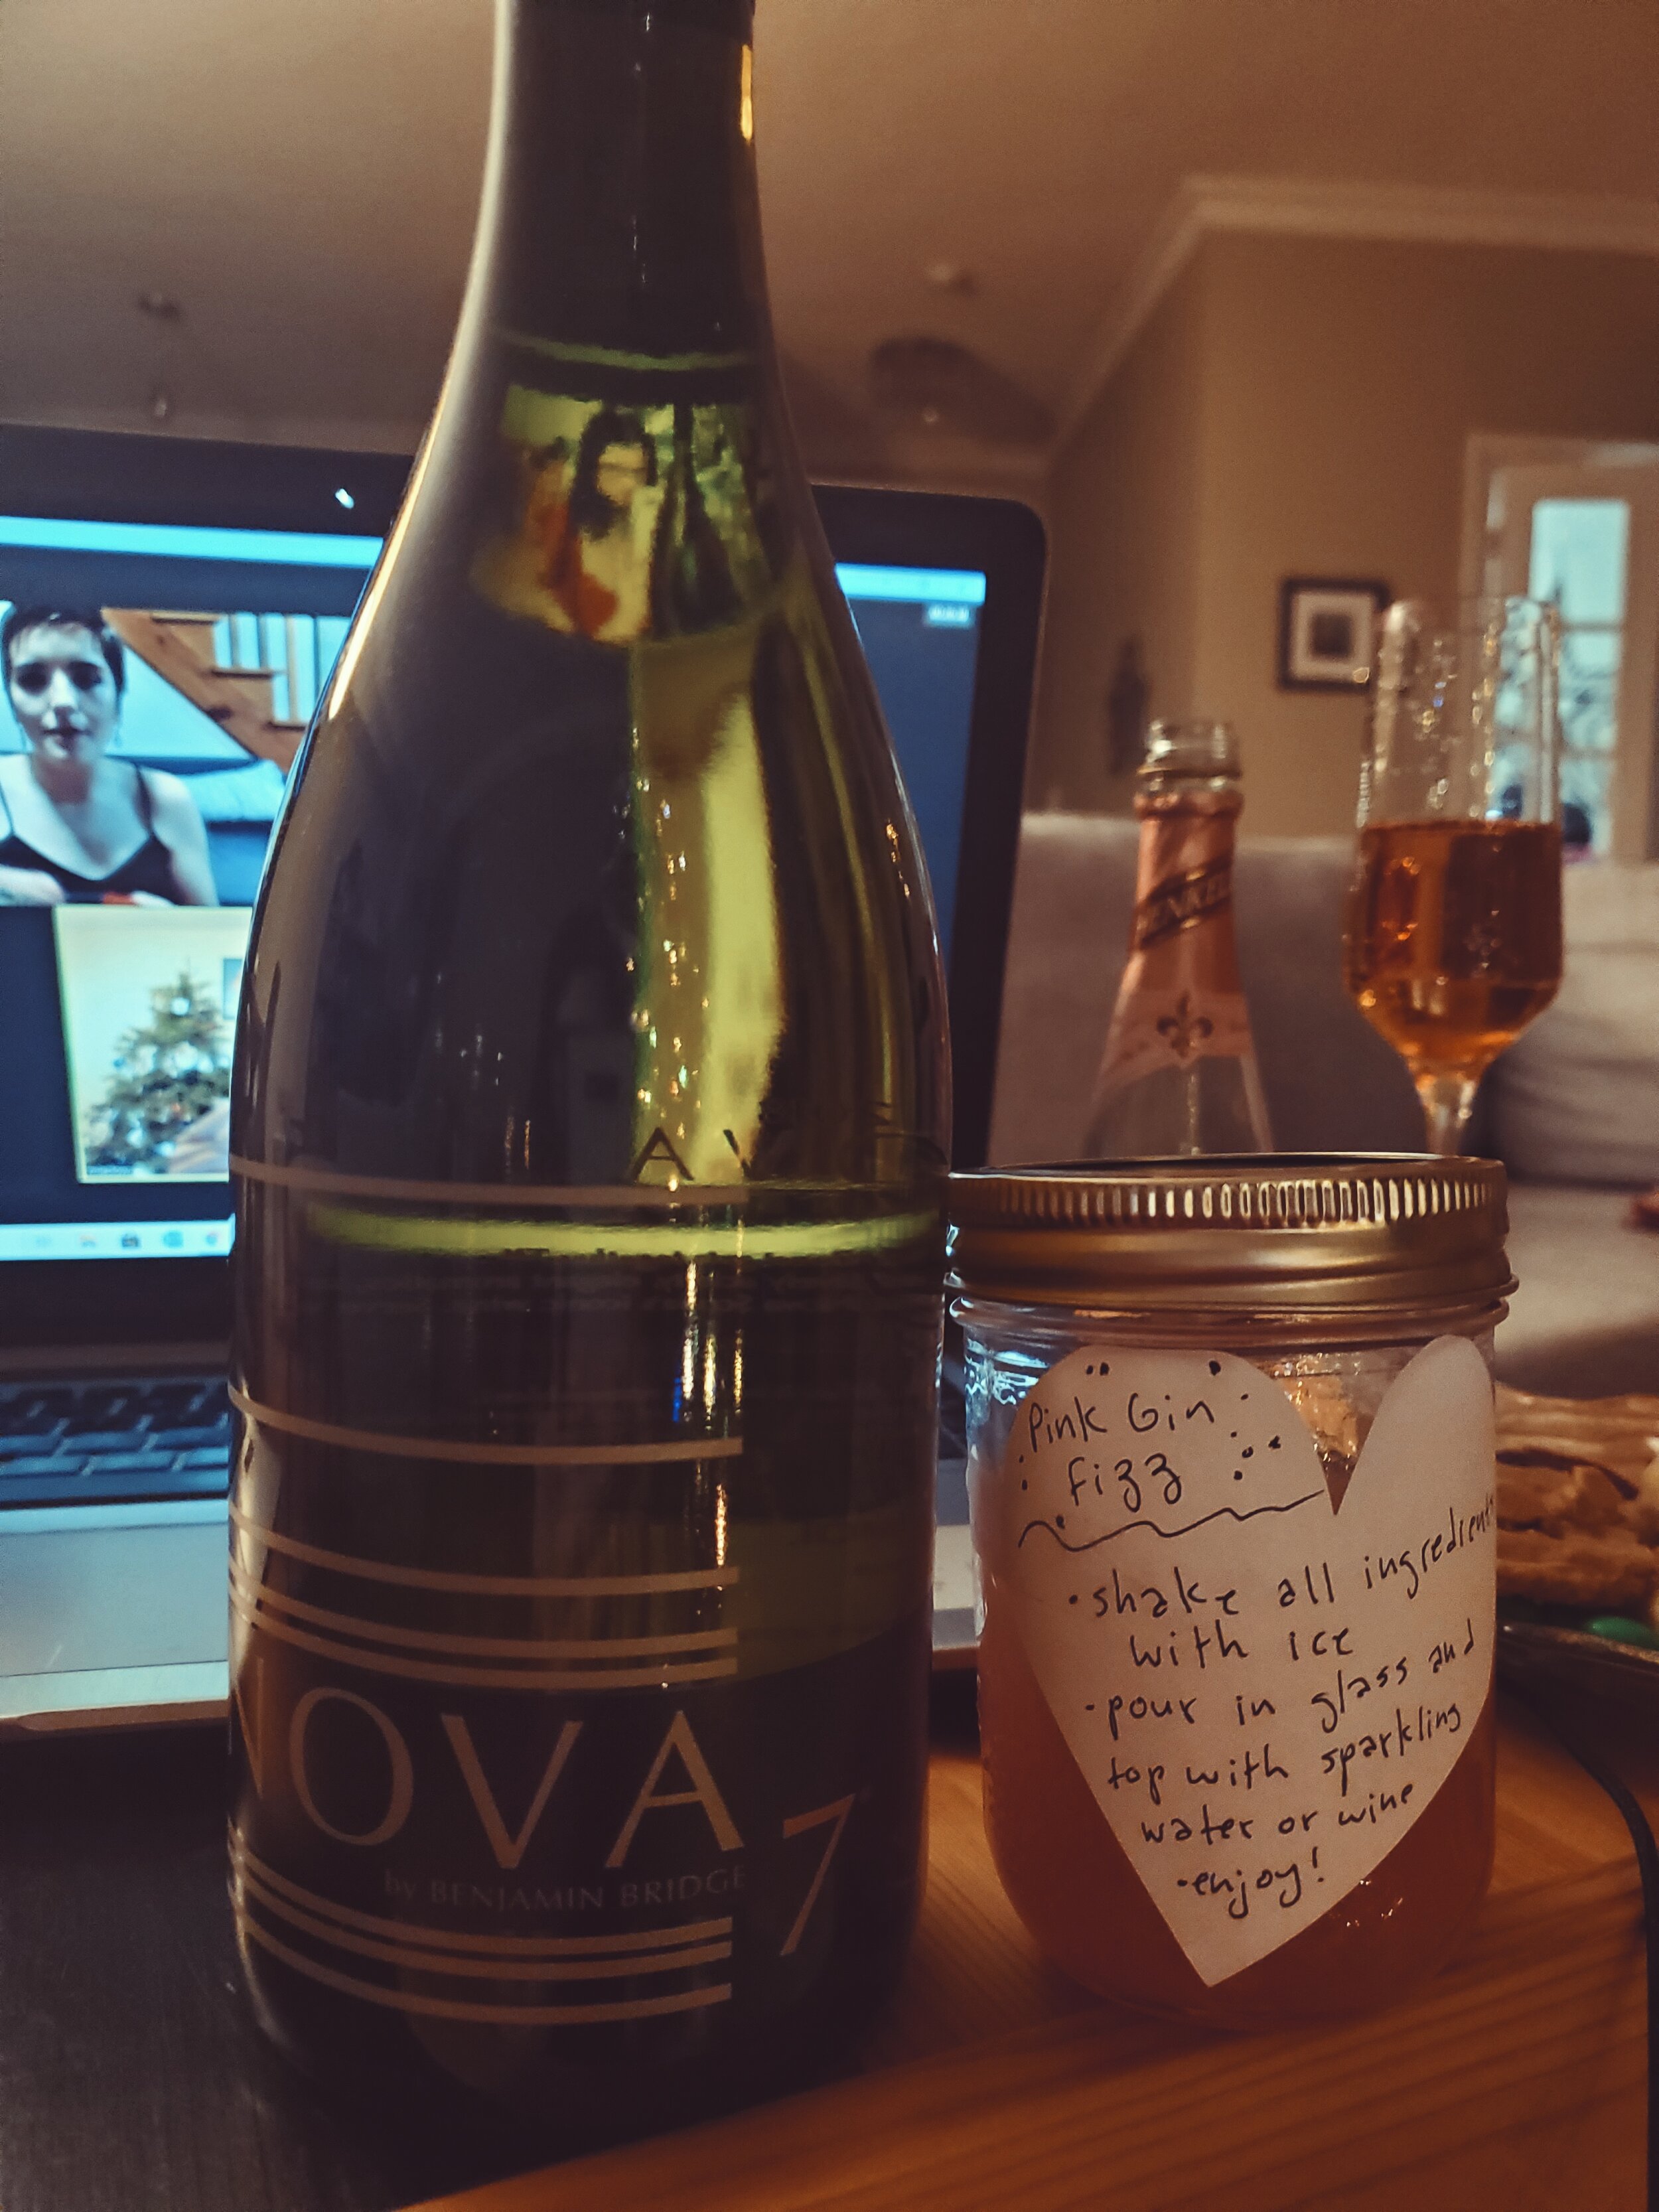  Mia bought us Nova 7 (if you know, you know) and the ingredients to make a pink gin fizz!!! I can’t wait to try this recipe!! Mia is always making fun new drinks and food so I have no doubt it will be amazing! 